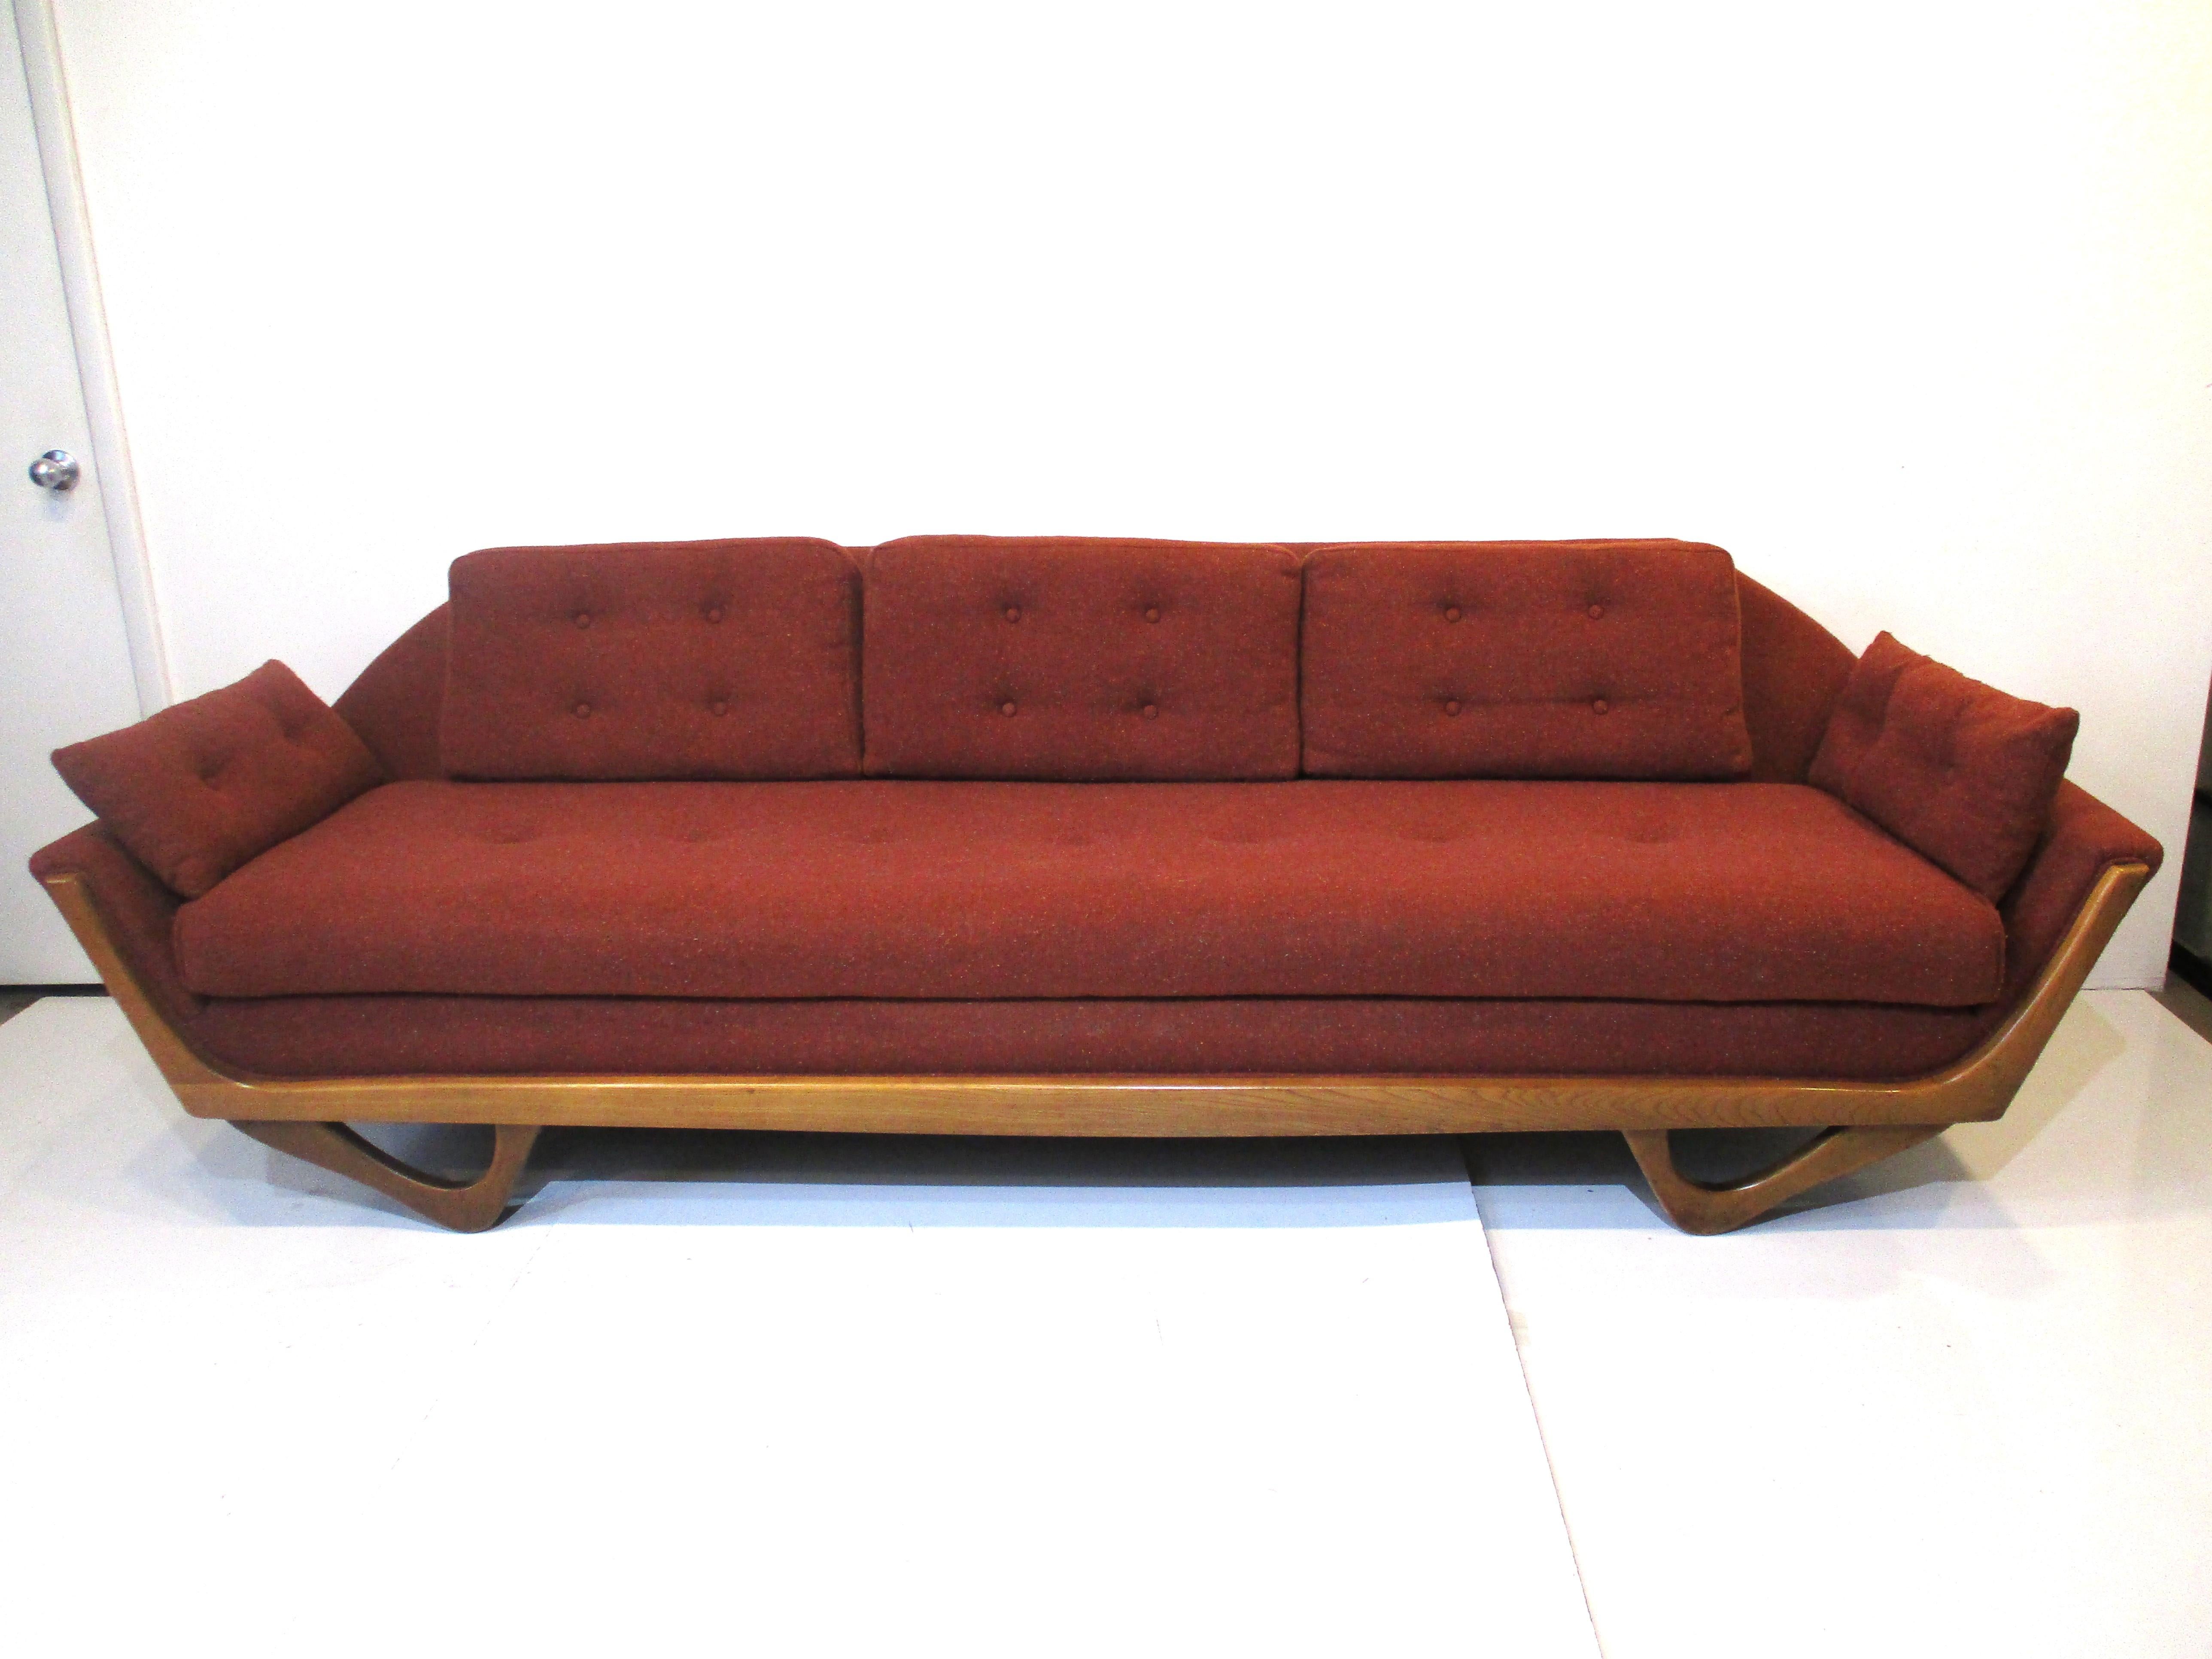 A midcentury upholstered Gondola sofa with loose back and arm cushions in the manner of Adrian Pearsall. A very comfortable and well crafted piece in a speckled toned fabric with bits of lighter tones of blue , orange , tan on a brick colored